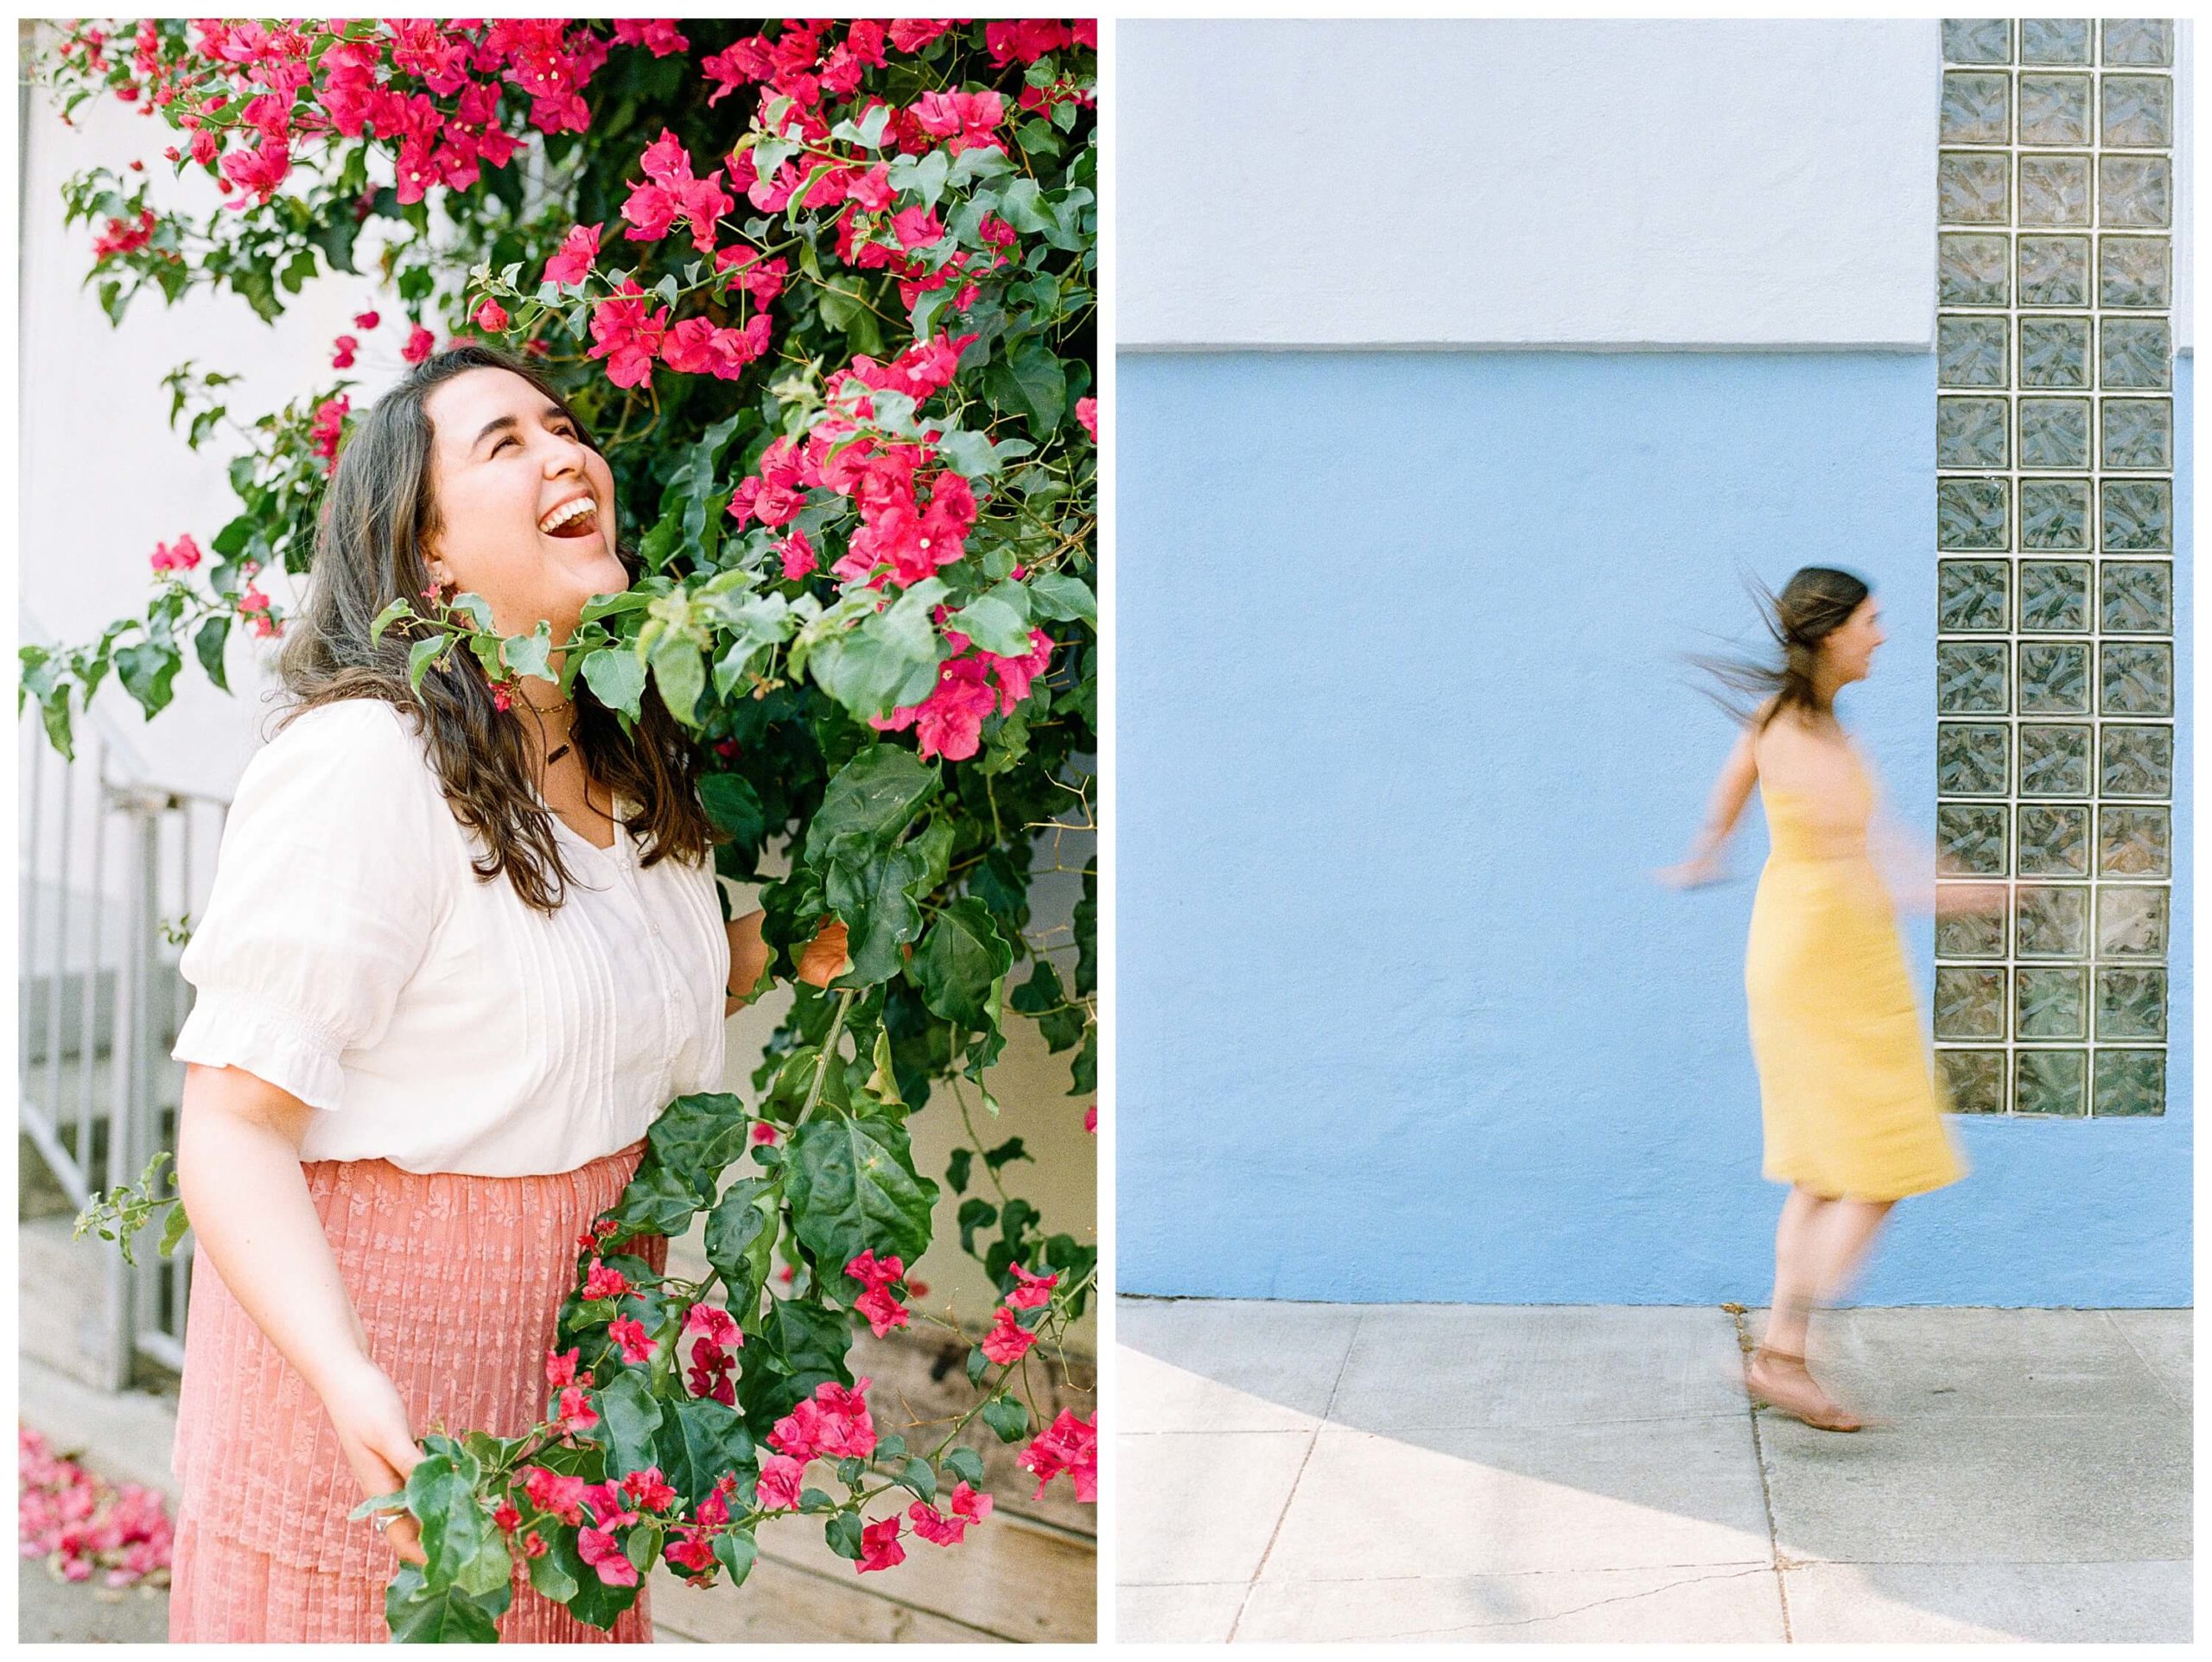 Left: A girl stands in a cascade of bougainvillea, looking up and laughing at the flowers. Right: A blur of a girl in a yellow dress dances across the sidewalk in front of a blue wall. The girl's movements are blurry to convey movement through the photo.